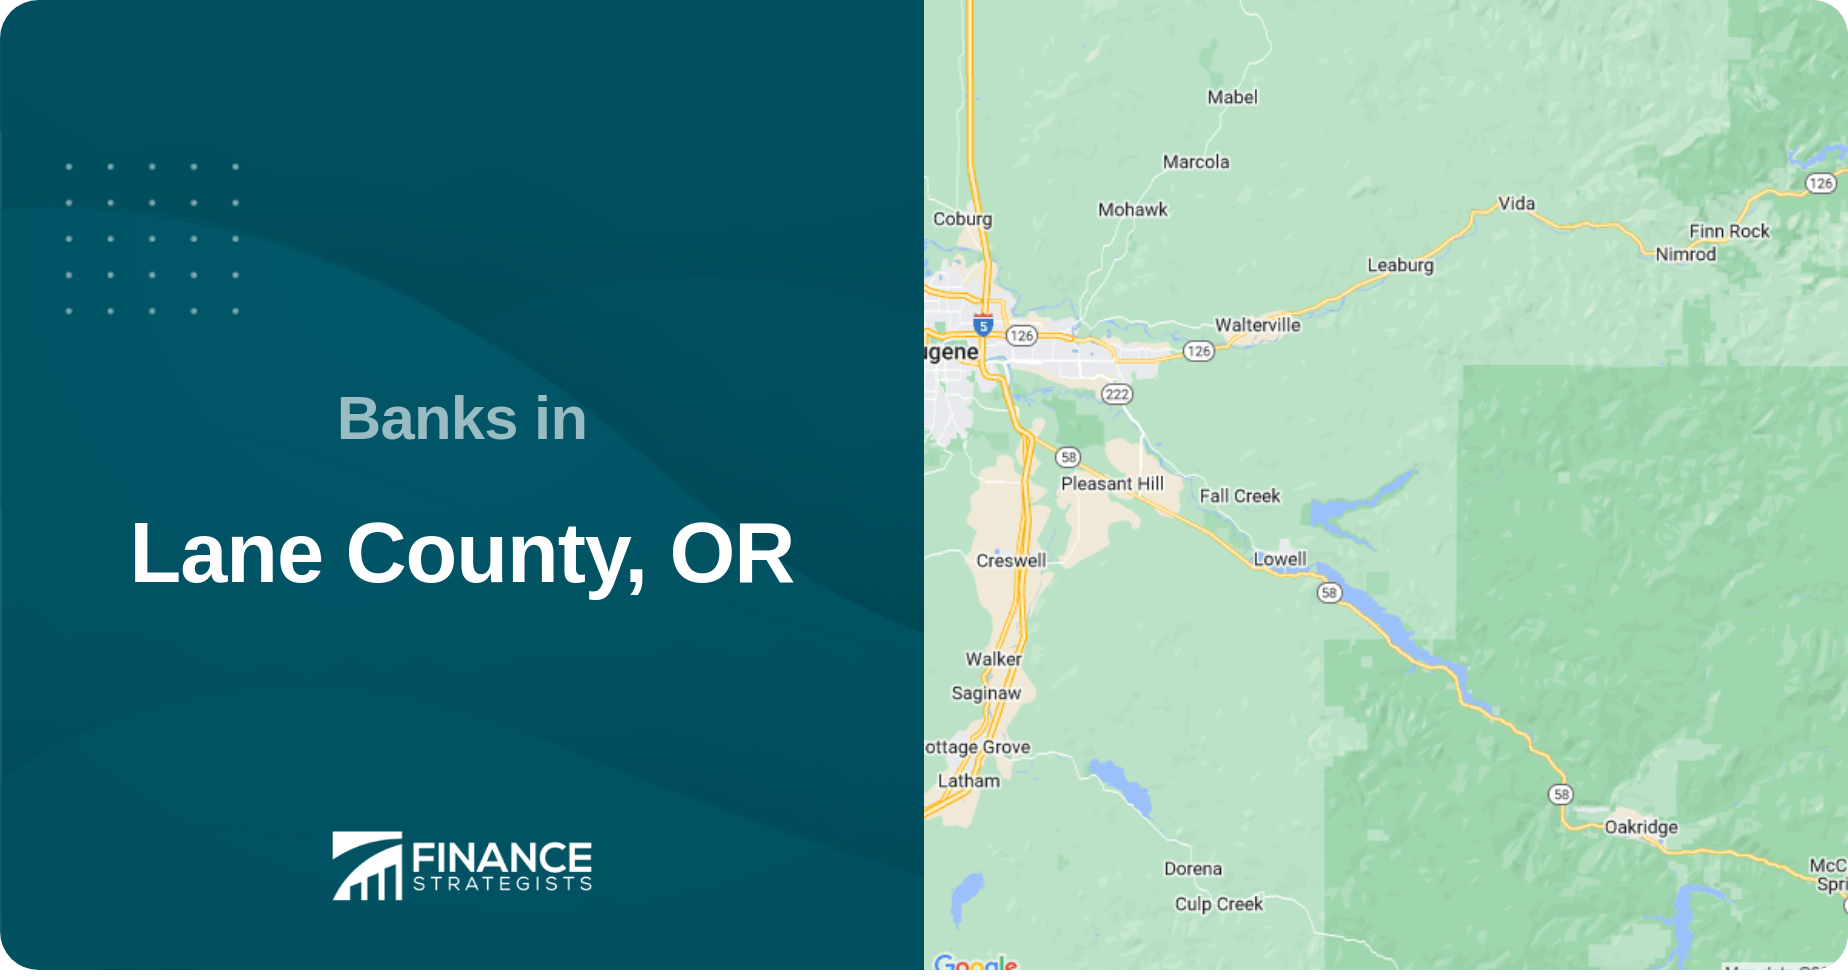 Banks in Lane County, OR